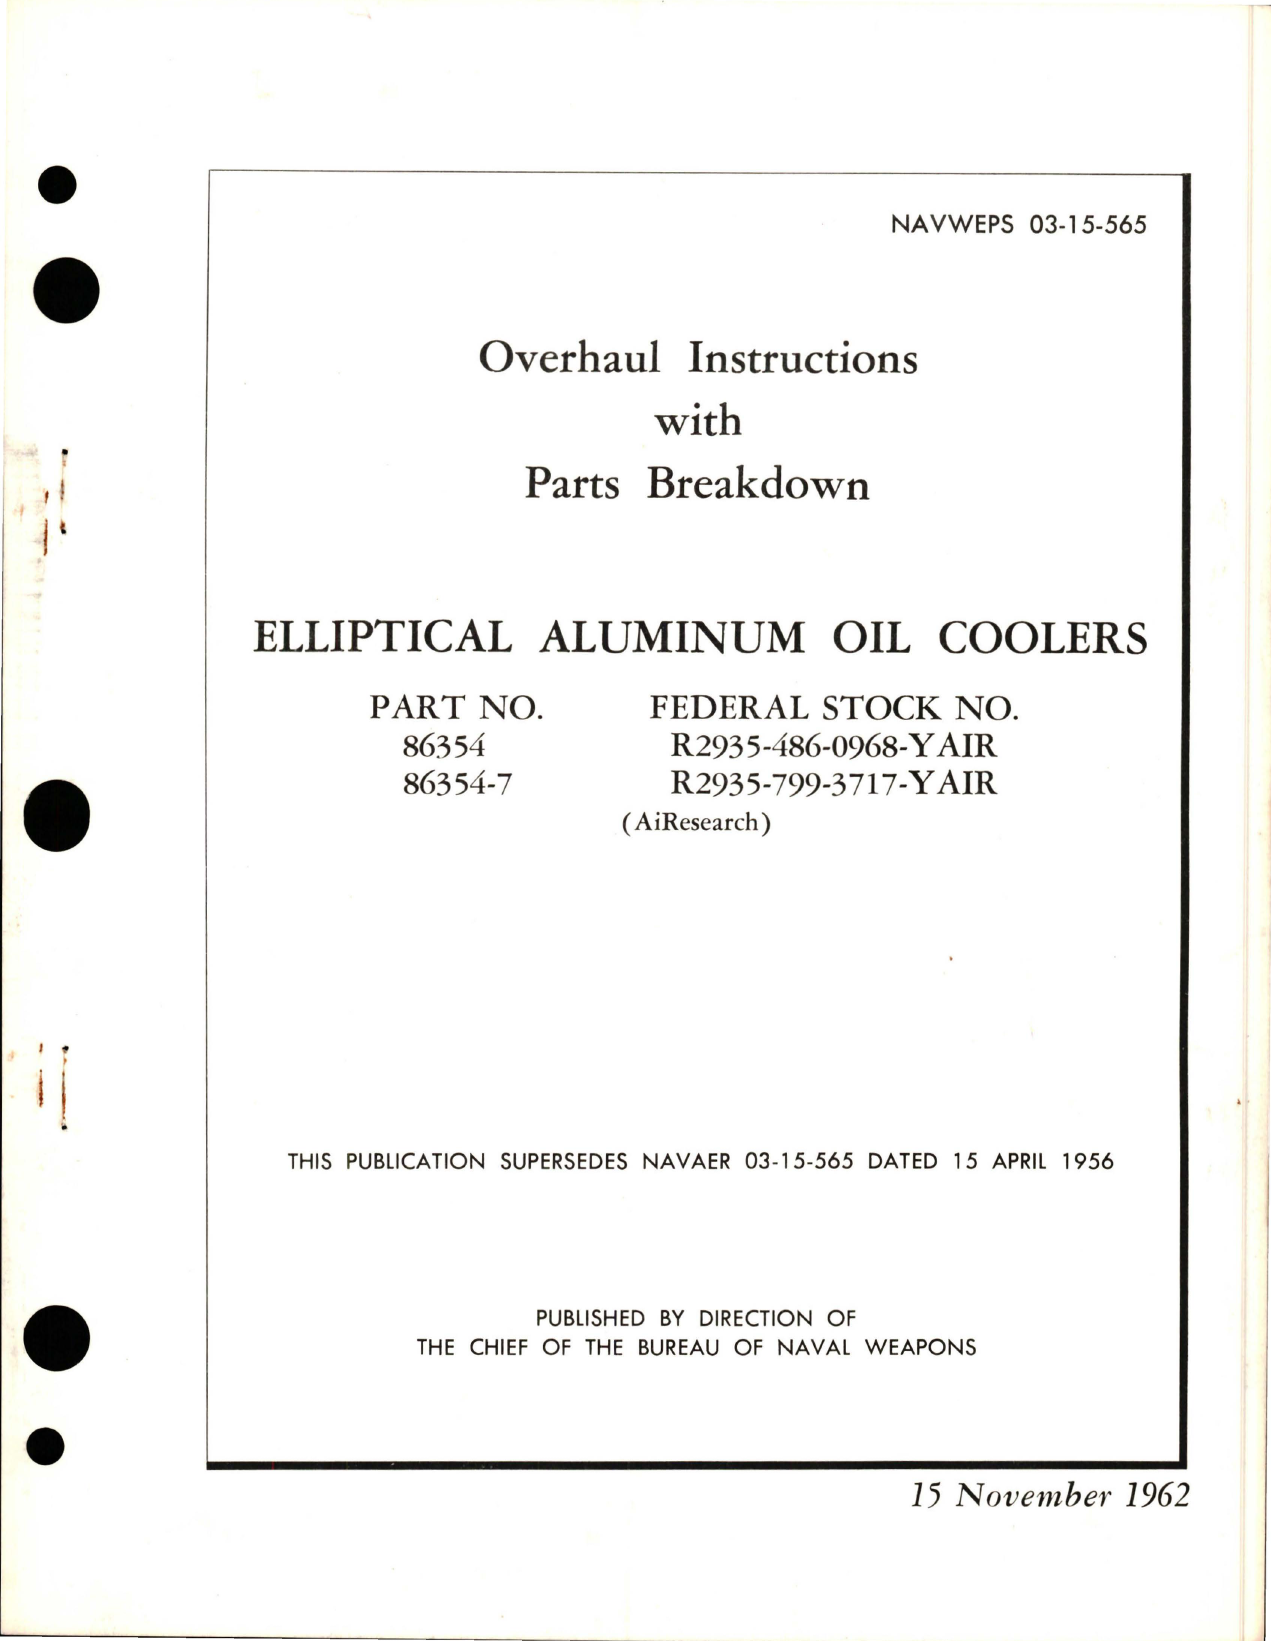 Sample page 1 from AirCorps Library document: Overhaul Instructions with Parts Breakdown for Elliptical Aluminum Oil Coolers - Parts 86354 and 86354-7 